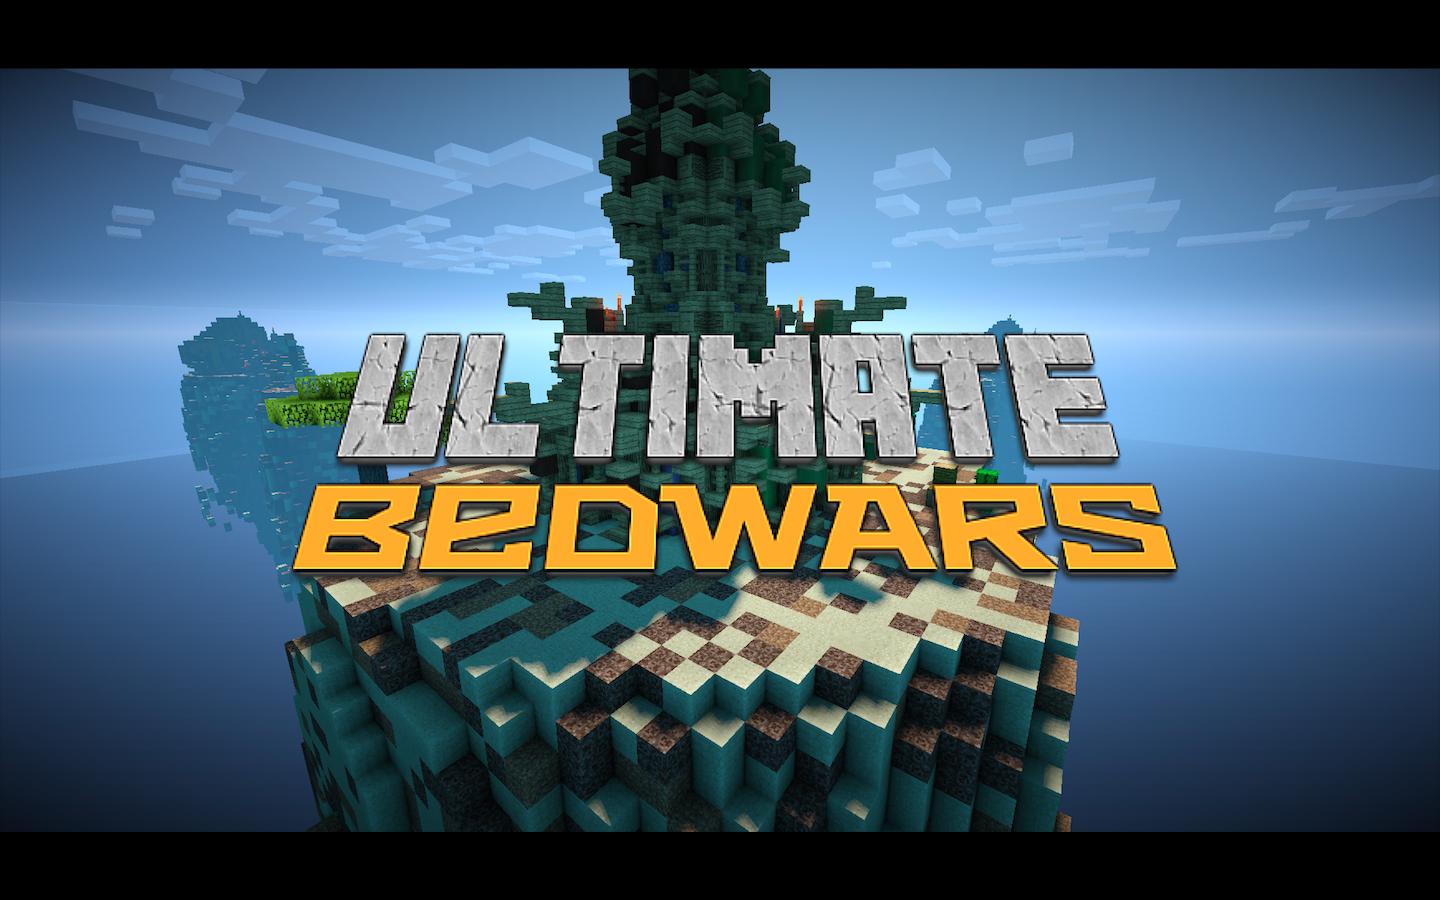 GitHub - WP-Team/bedwars: Everything about the bedwars server build